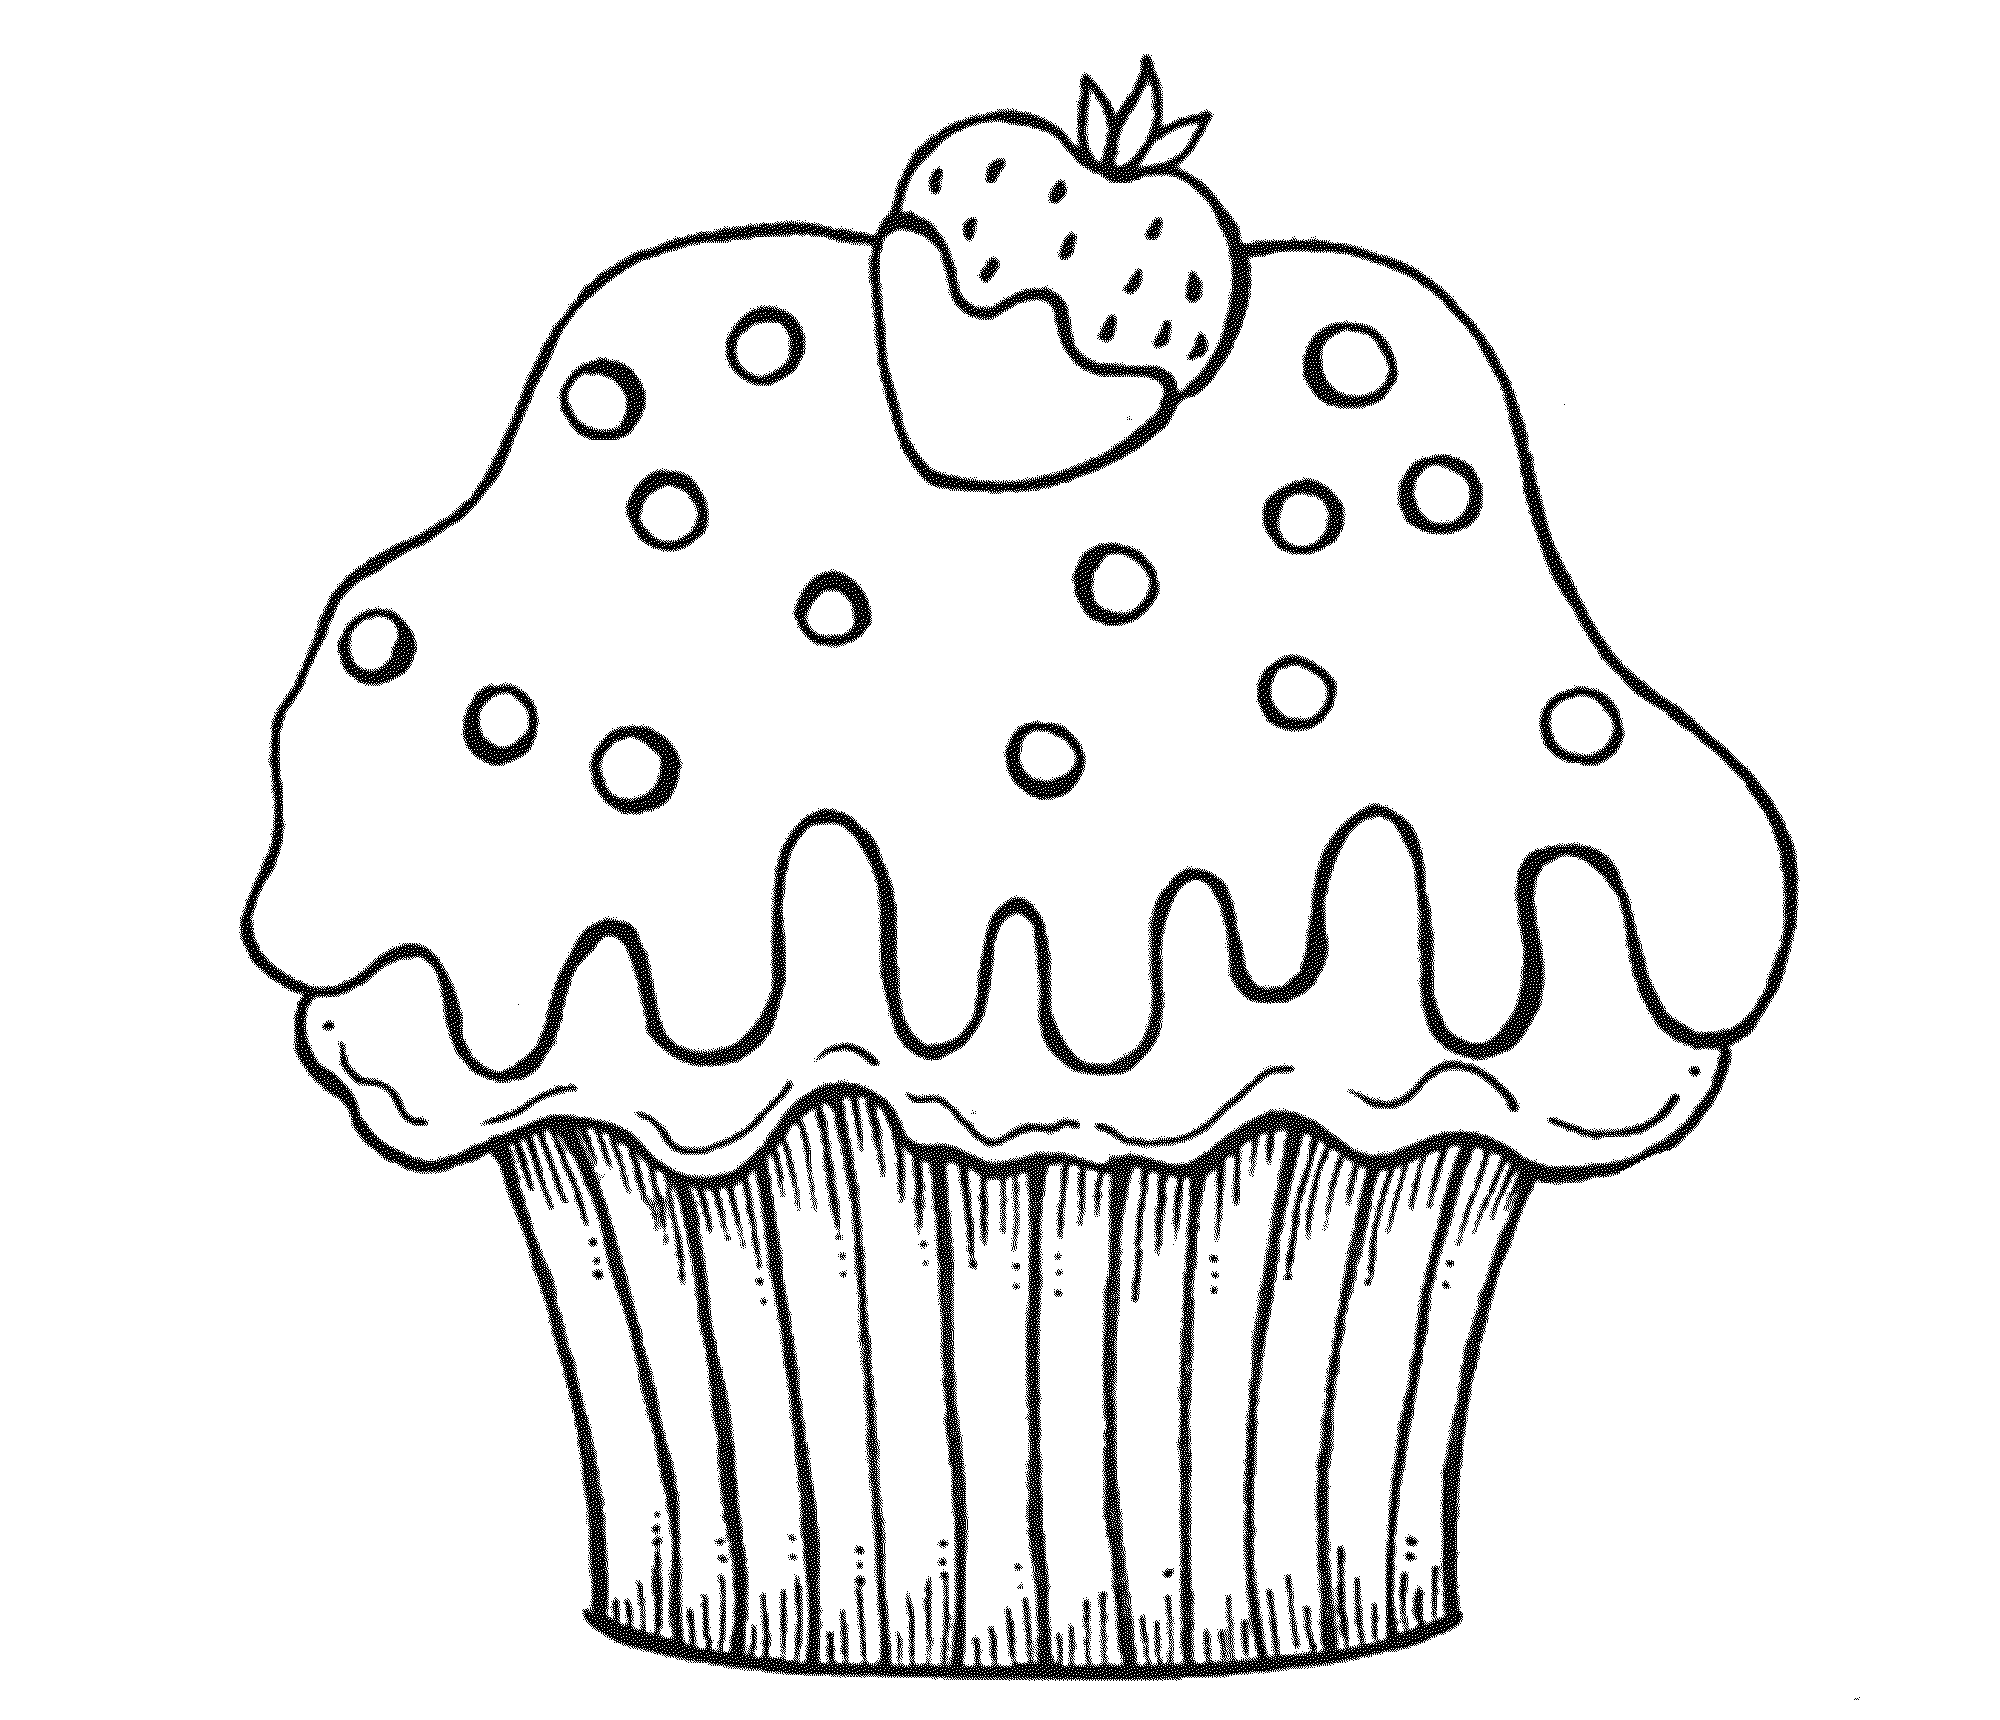 Cupcake Coloring Pages Beautiful - Coloring pages